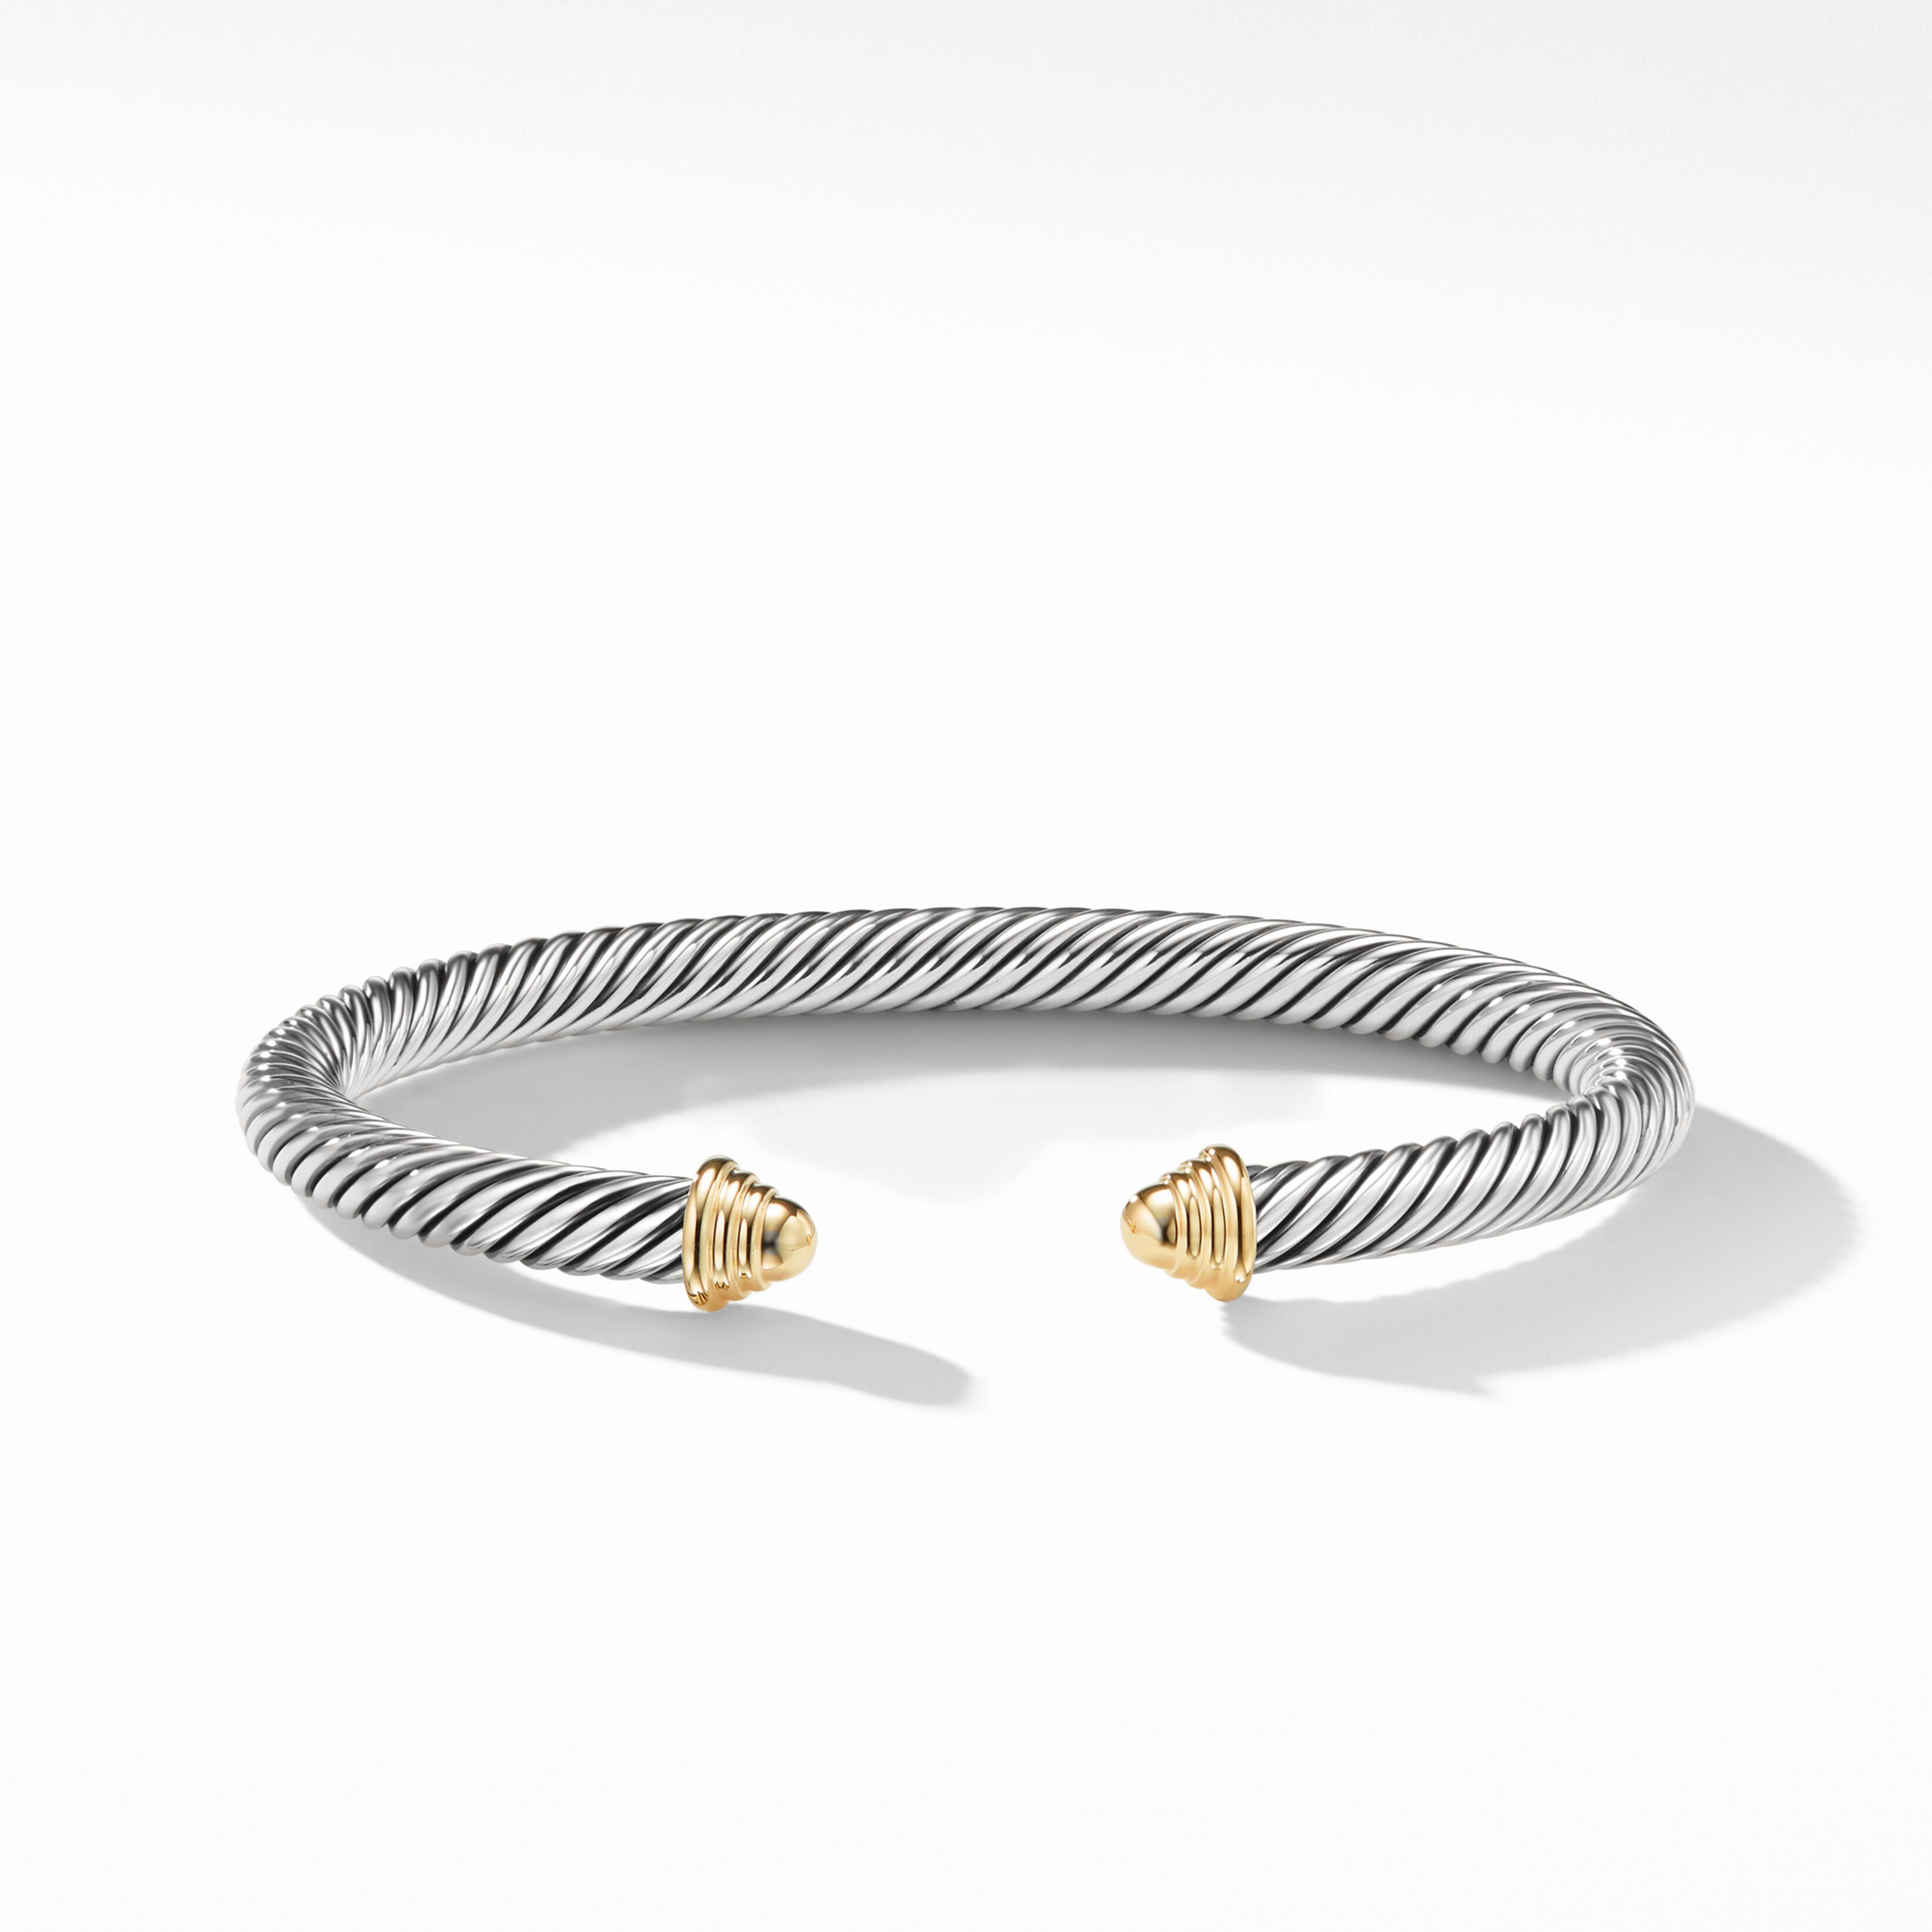 Cable Classics Bracelet in Sterling Silver with 14K Yellow Gold Domes | David Yurman